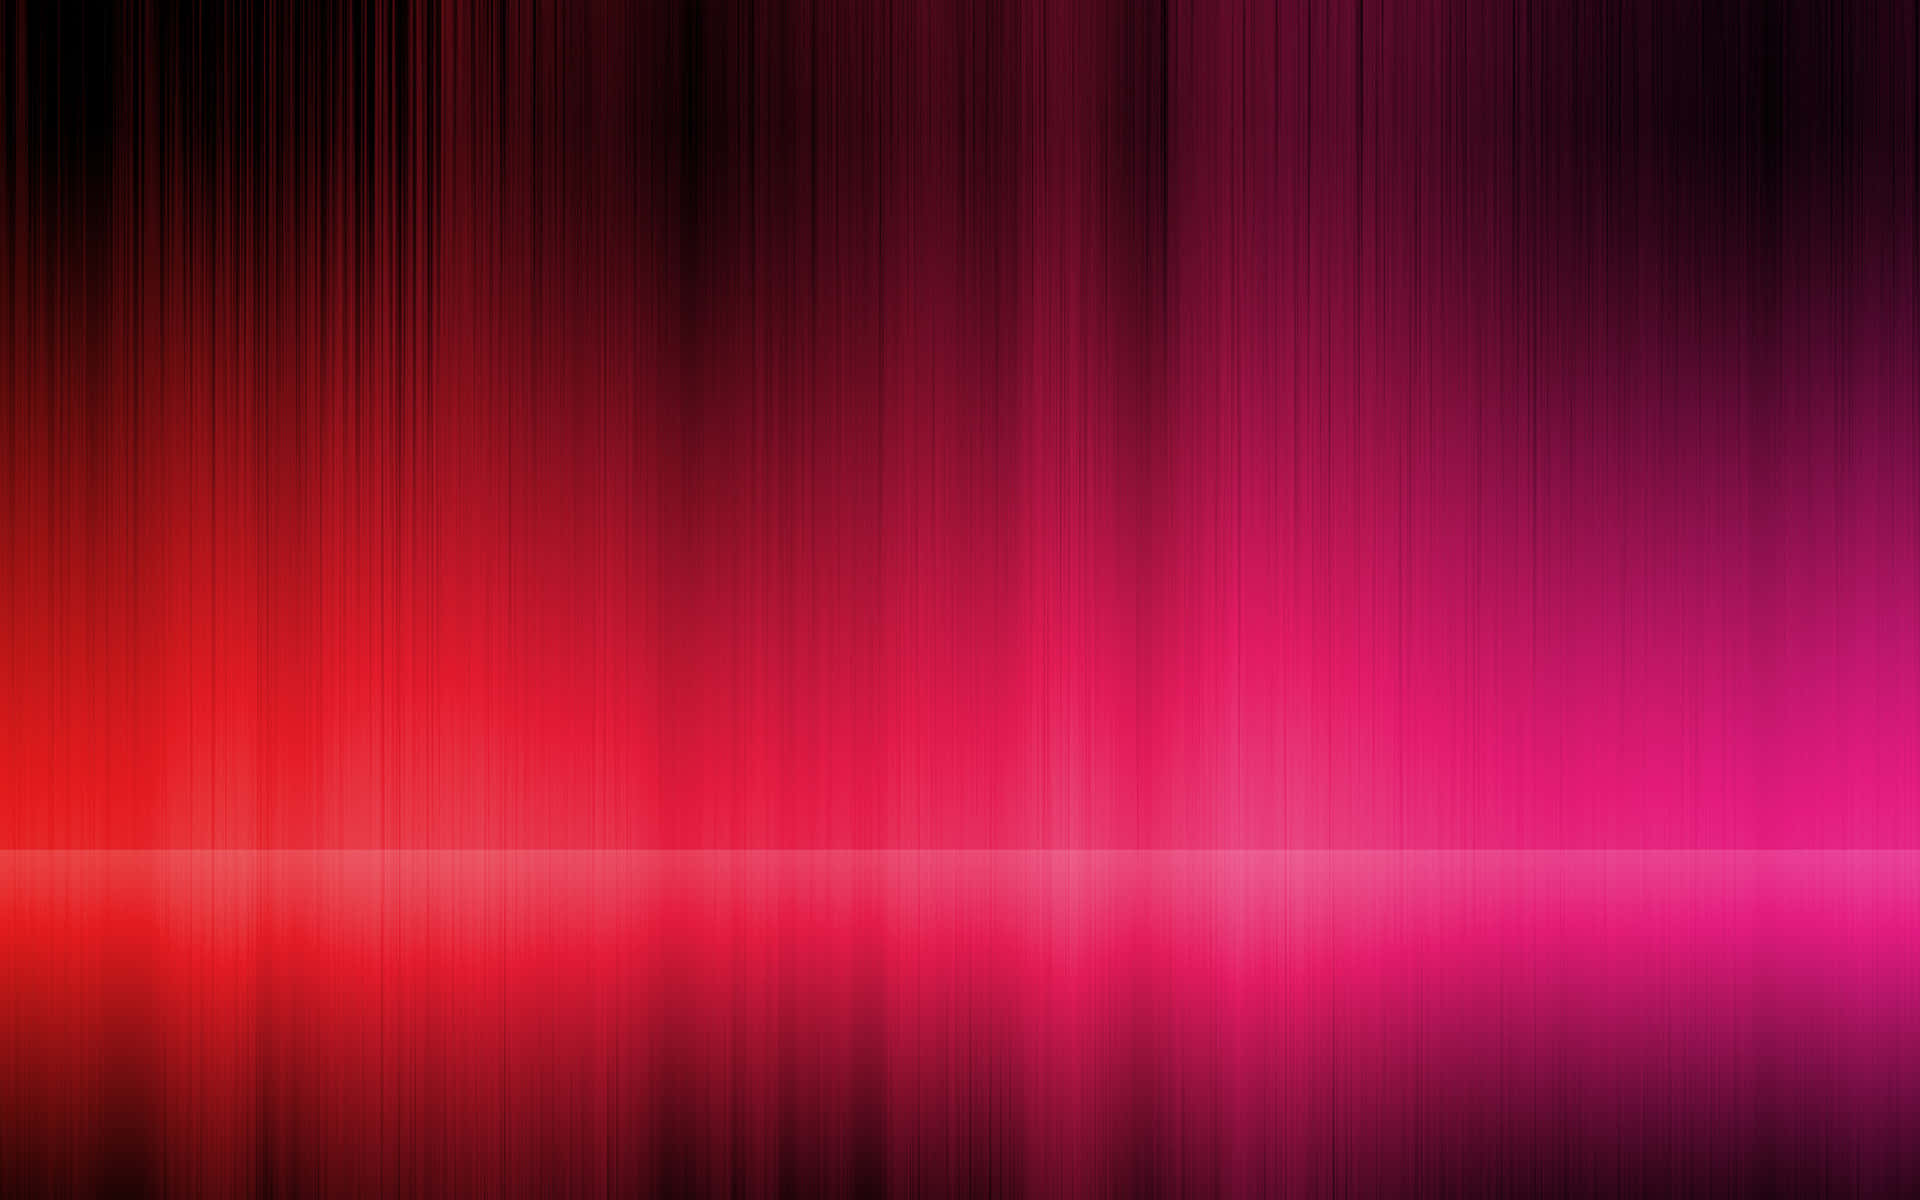 “A mysterious dark pink background with an ethereal glow”